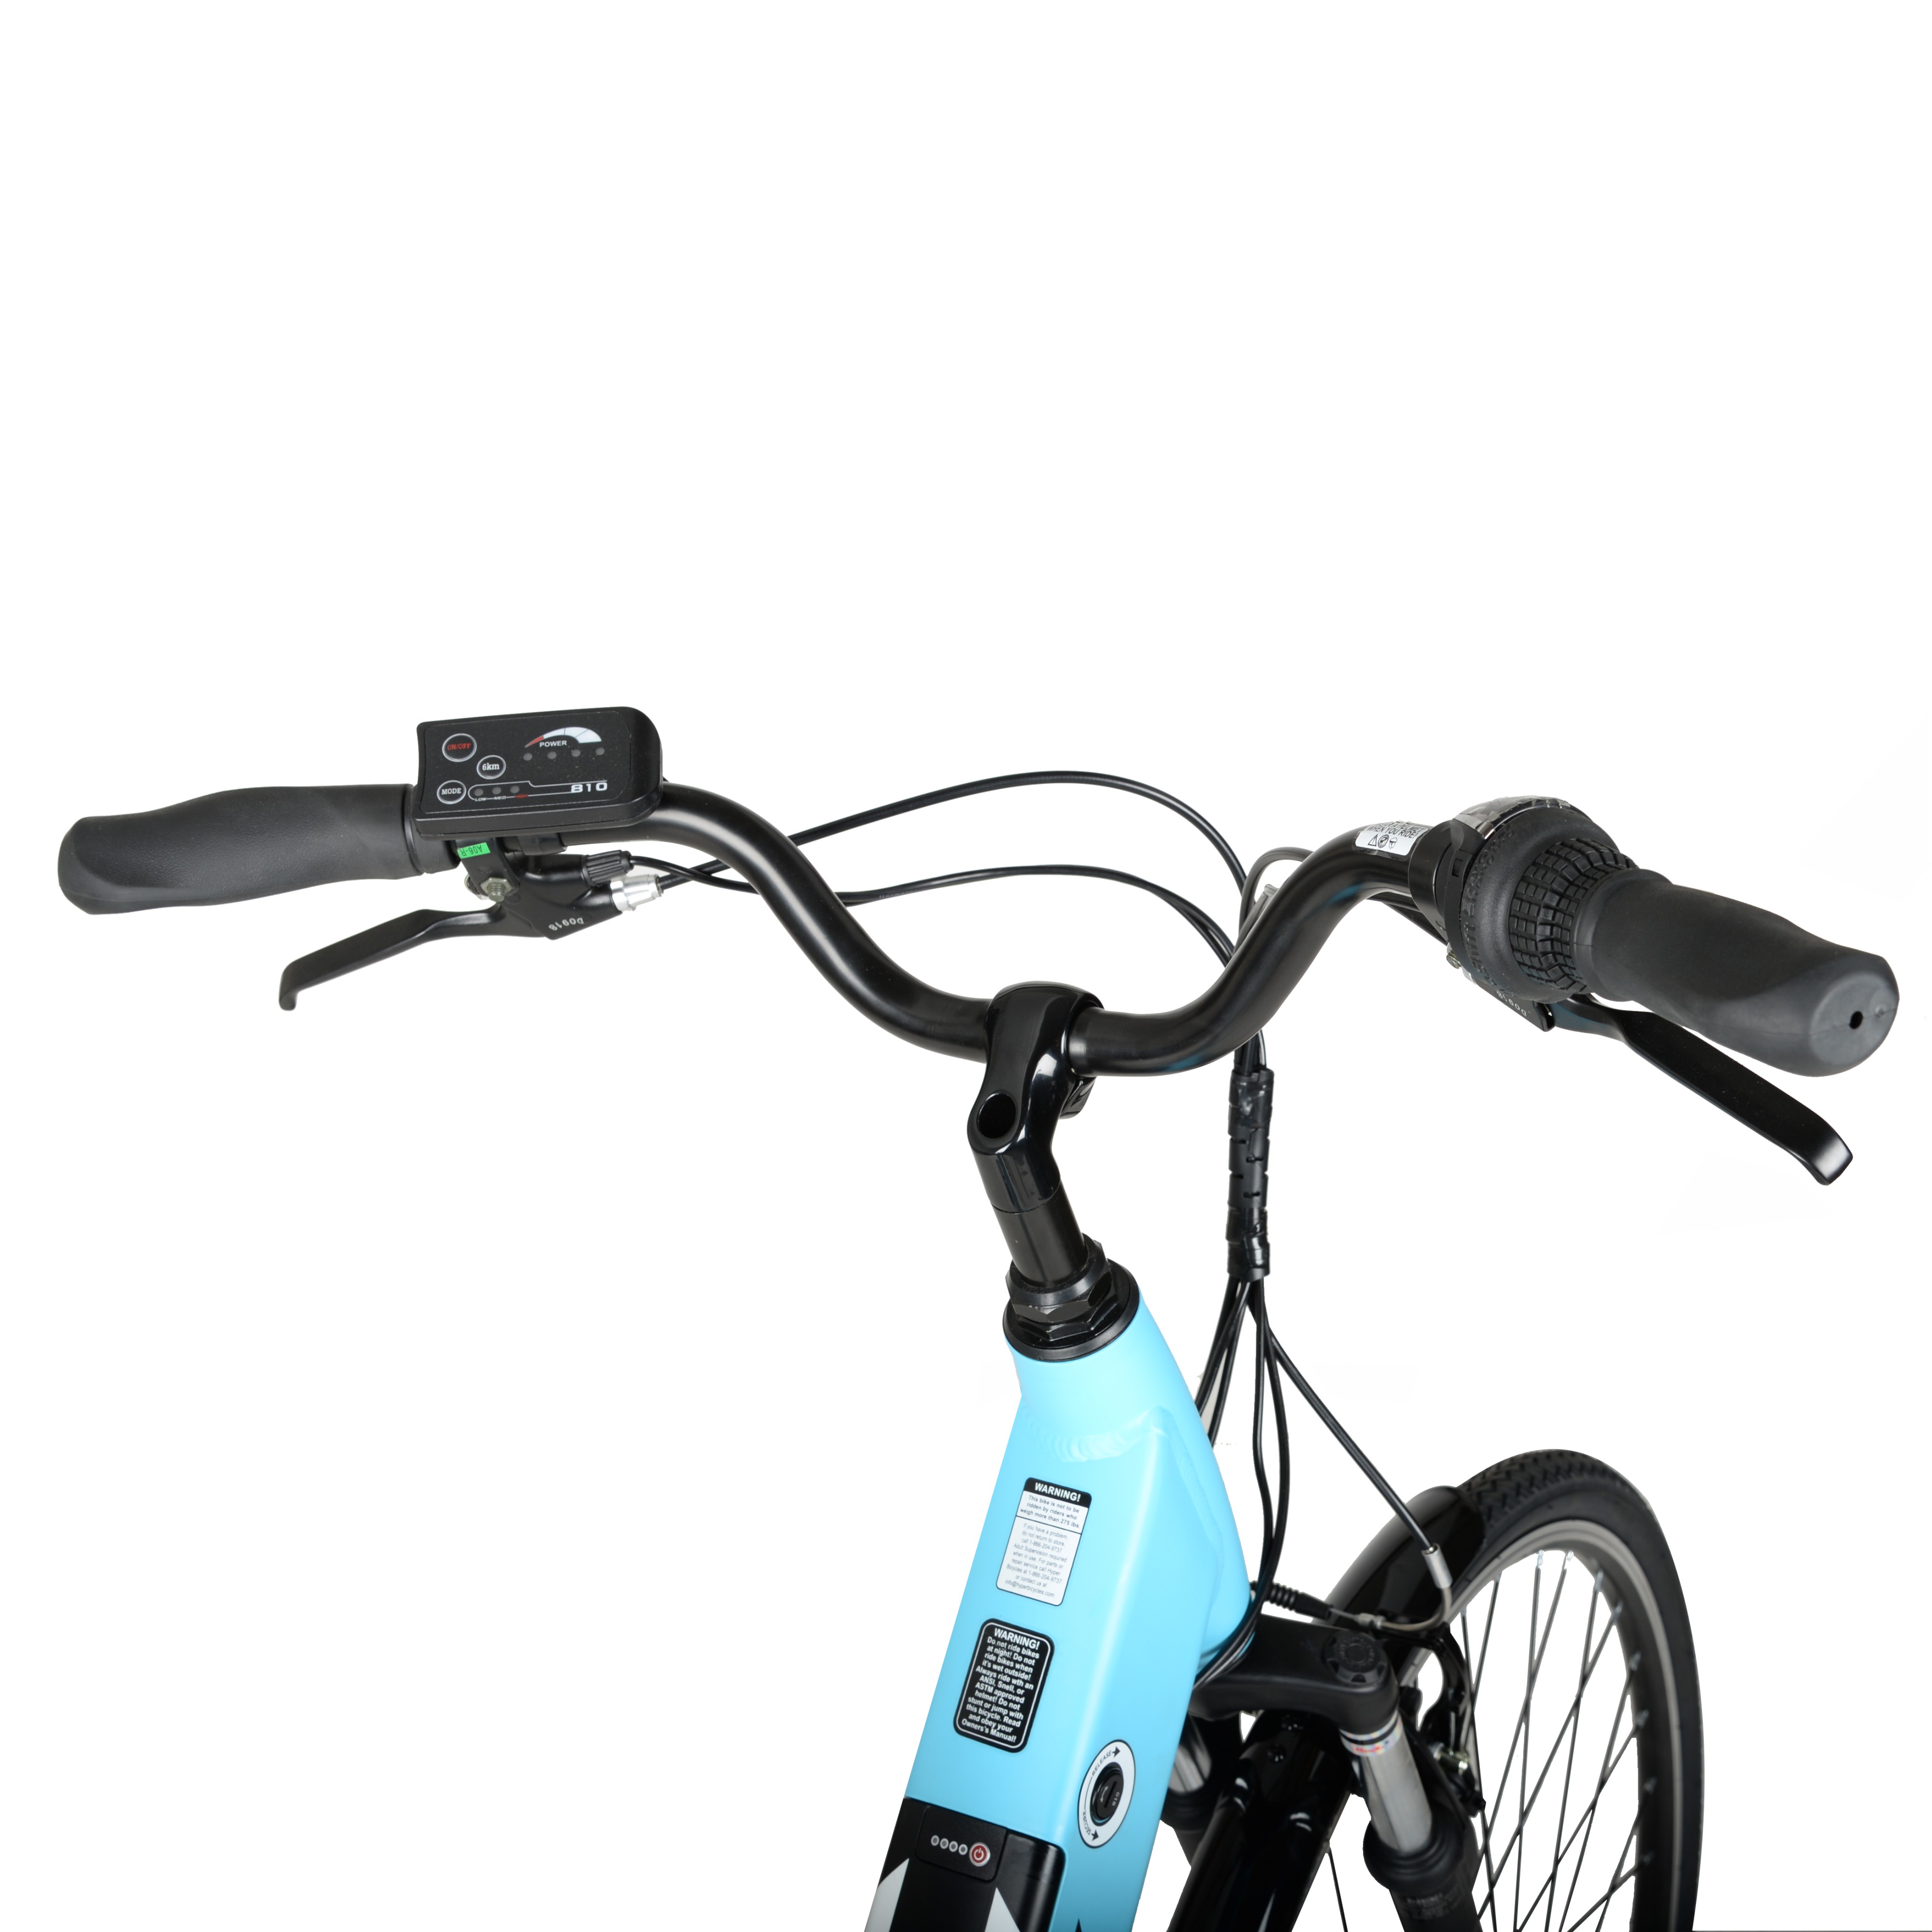 Hyper Bicycles E-Ride 700C 36V Electric Commuter E-Bike for Adults, Pedal-Assist, 250W Motor, Blue - image 5 of 18